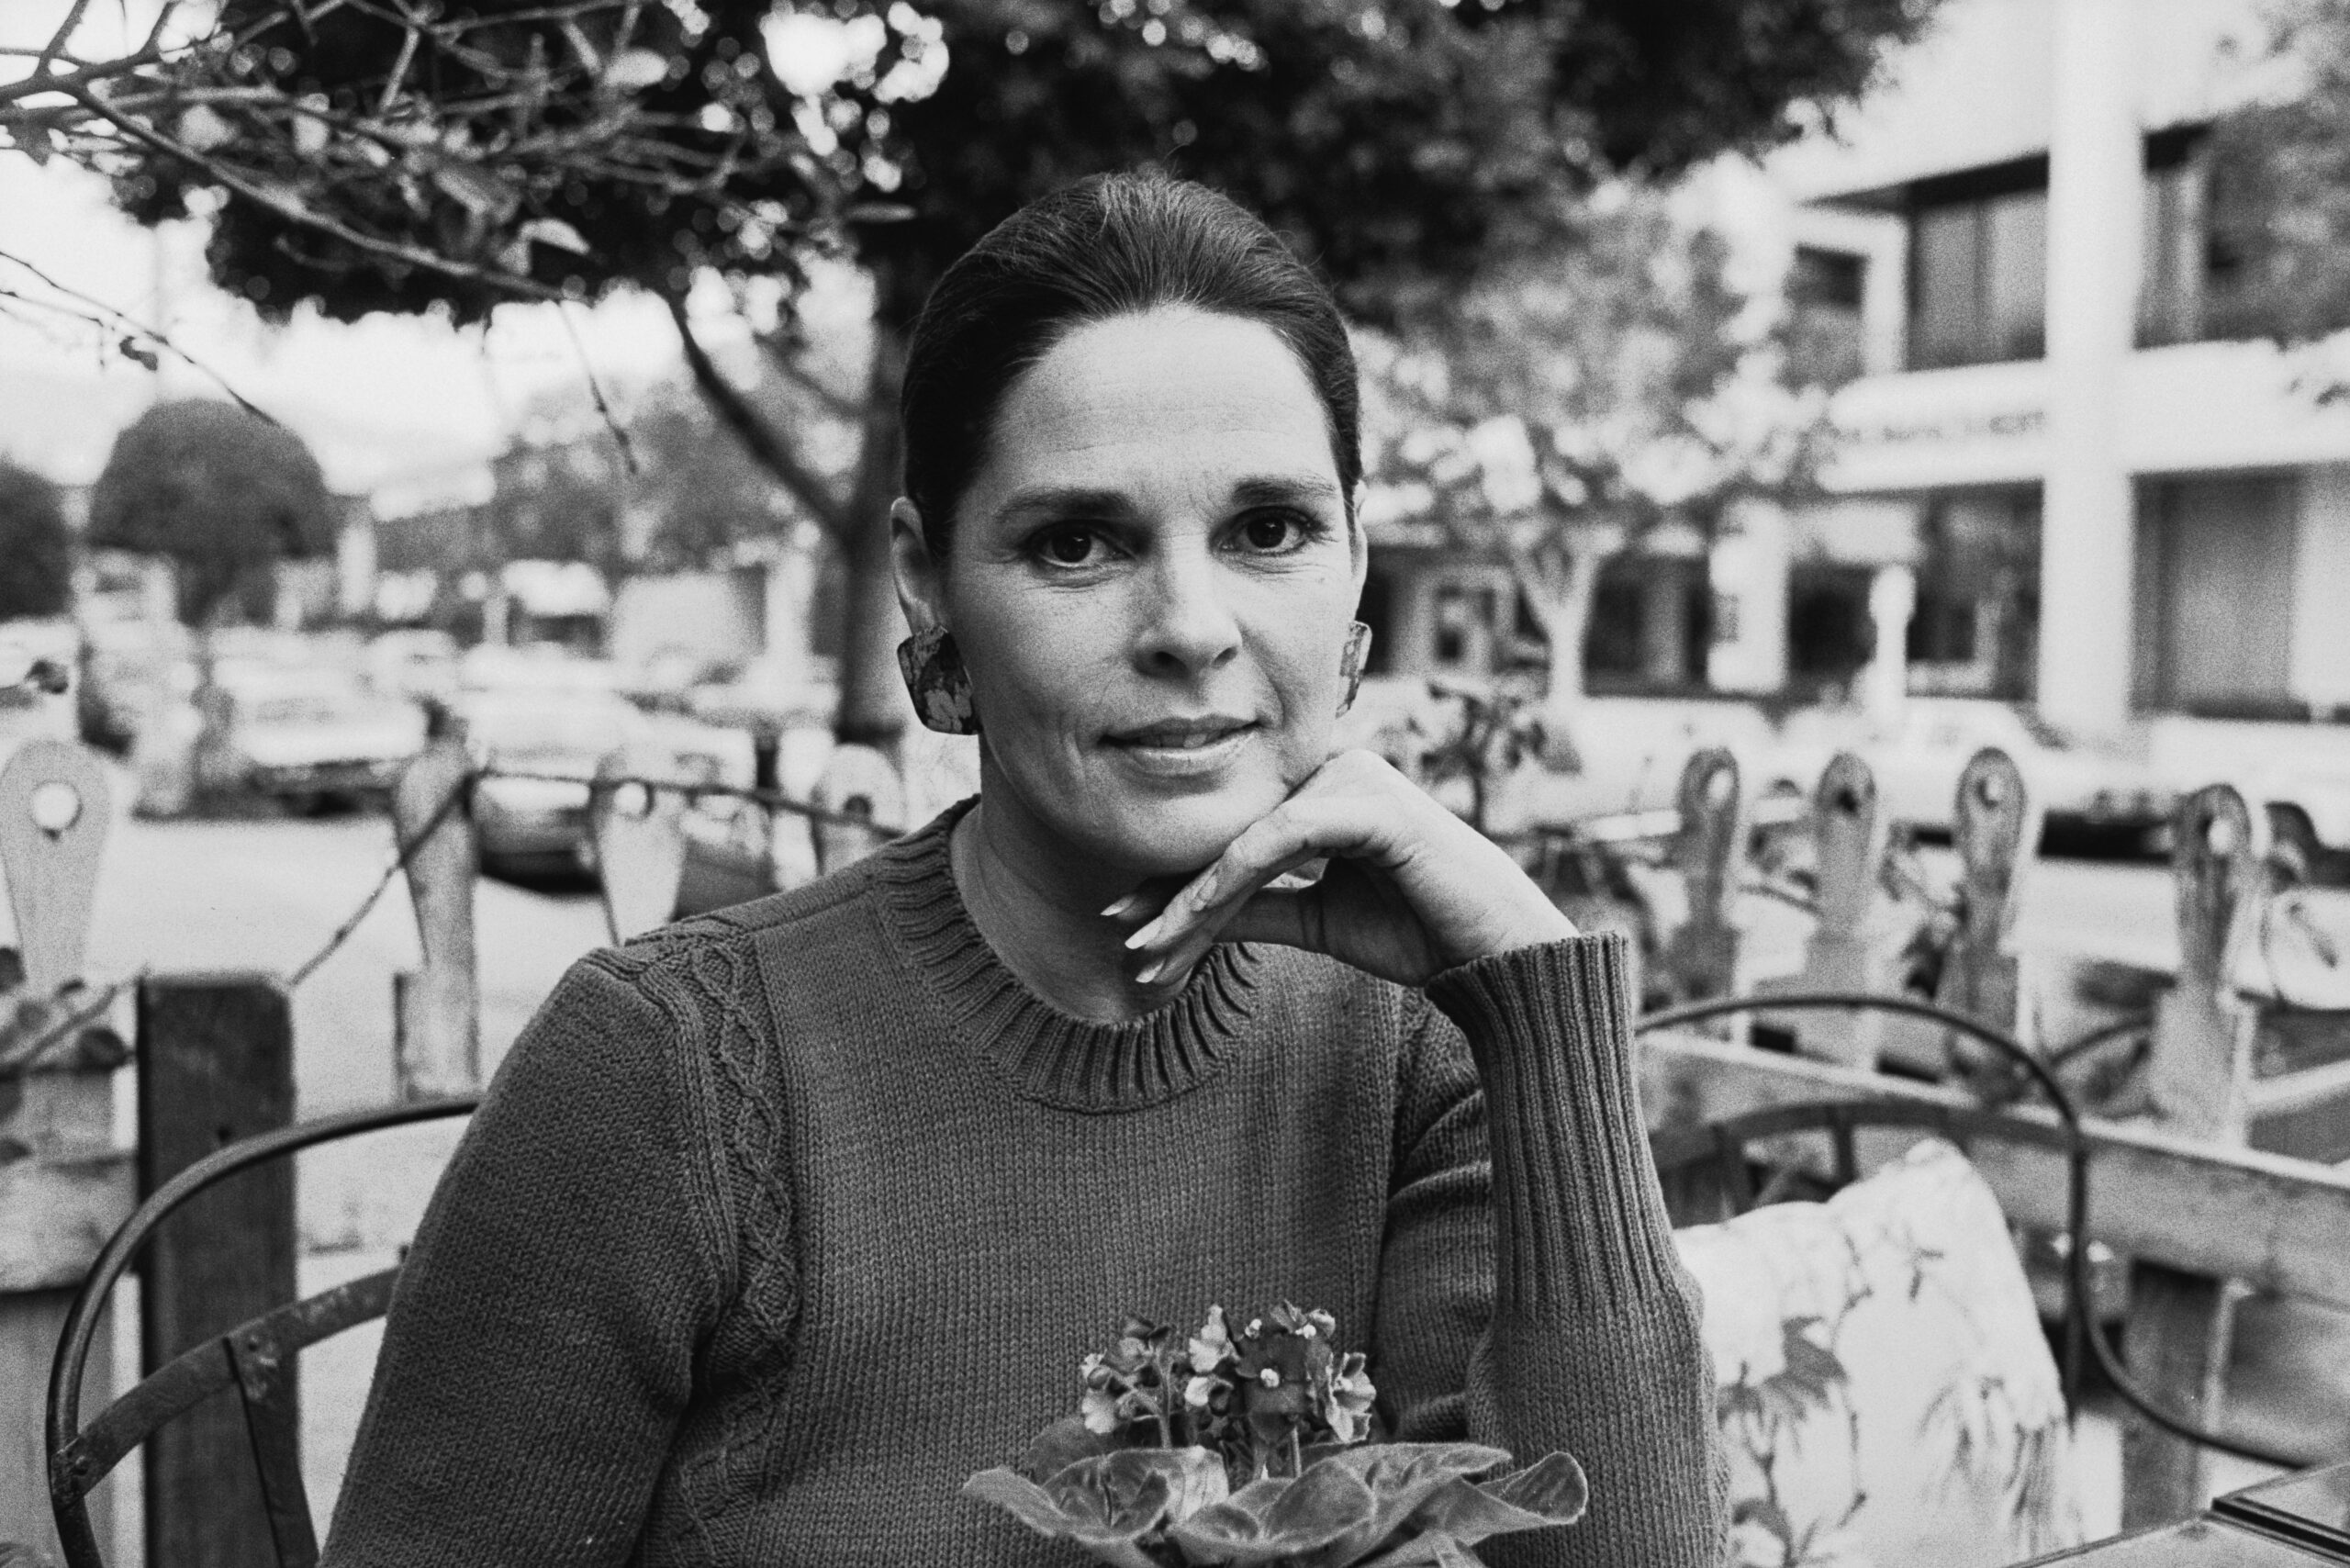 Ali MacGraw pictured wearing a knitted jumper while out at a restaurant February 6, 1985. | Source: Getty Images